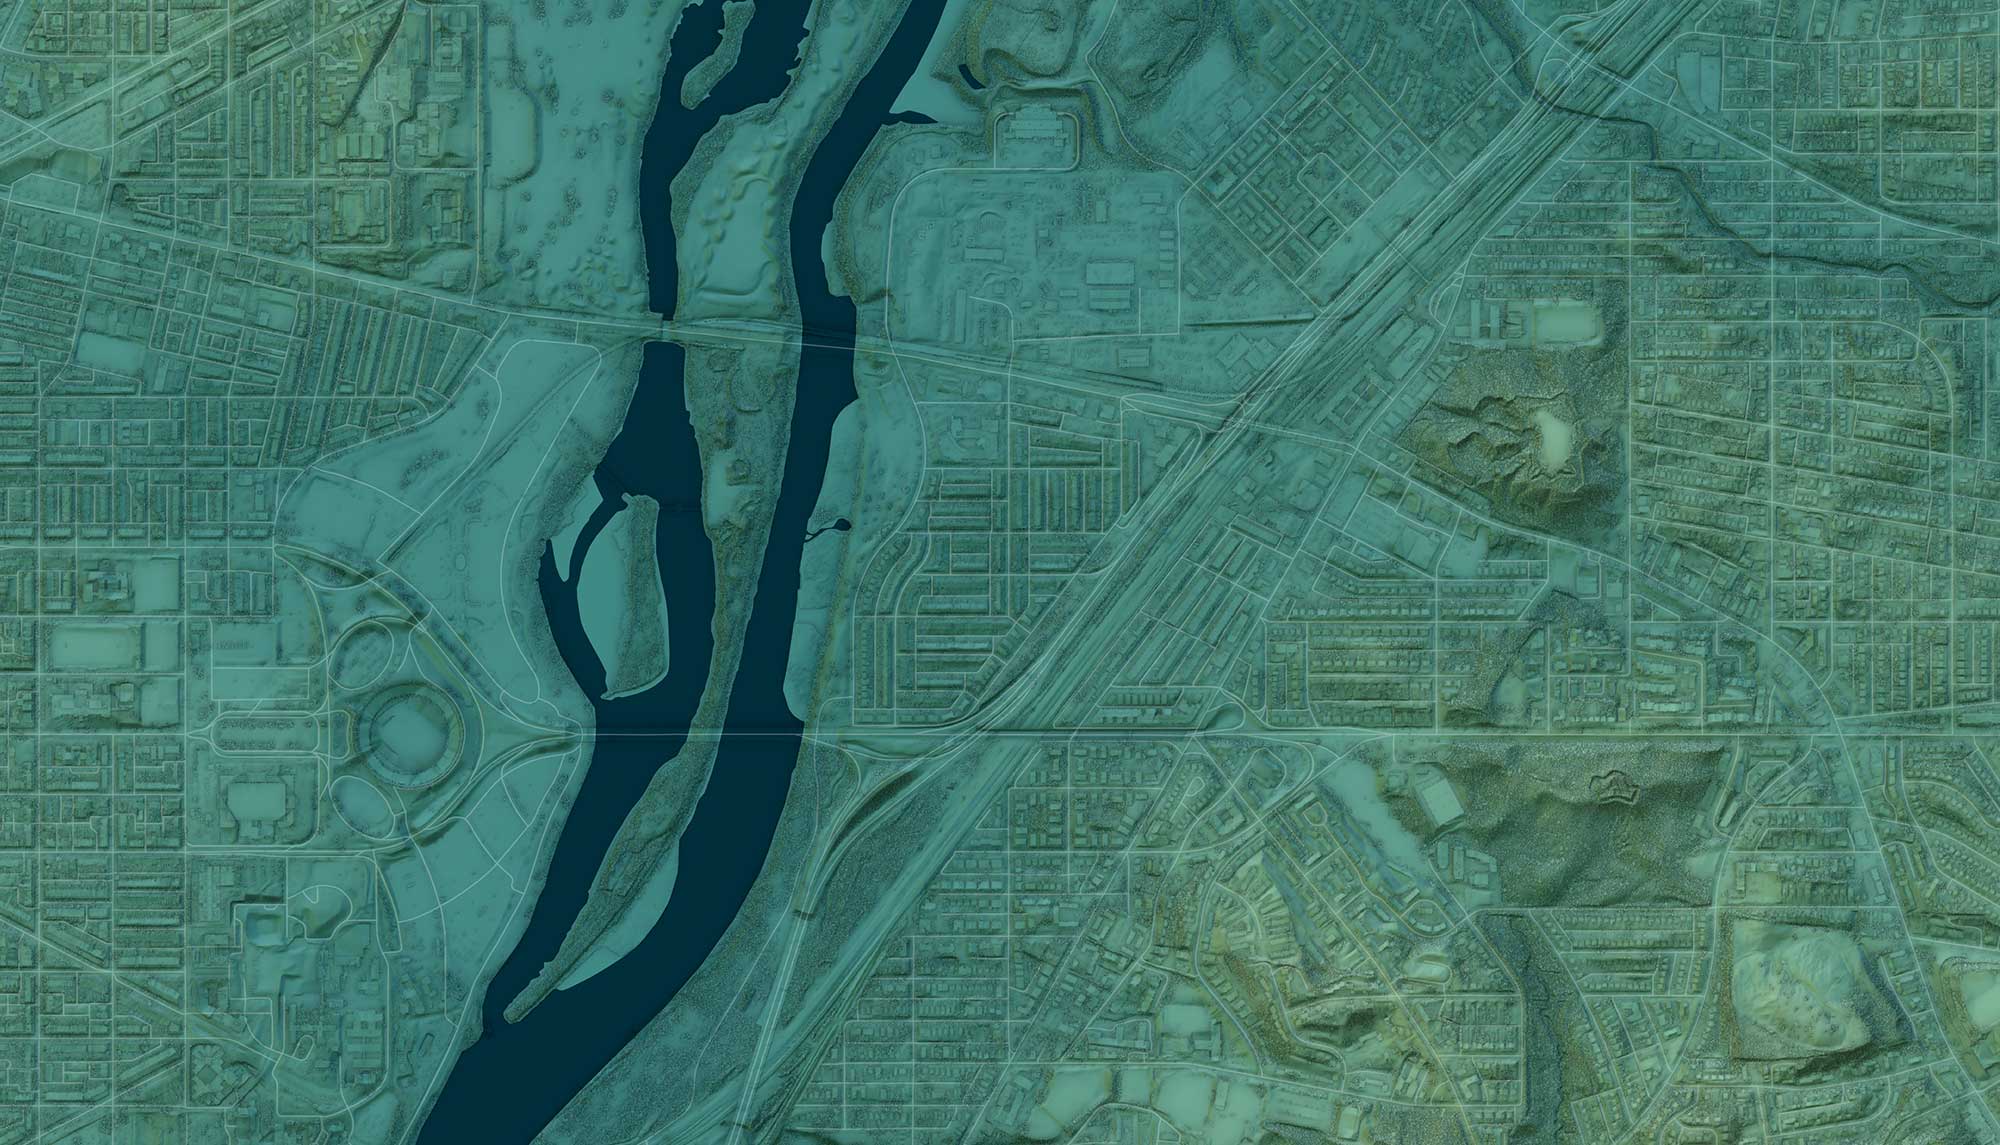 shaded relief map of the Anacostia River area